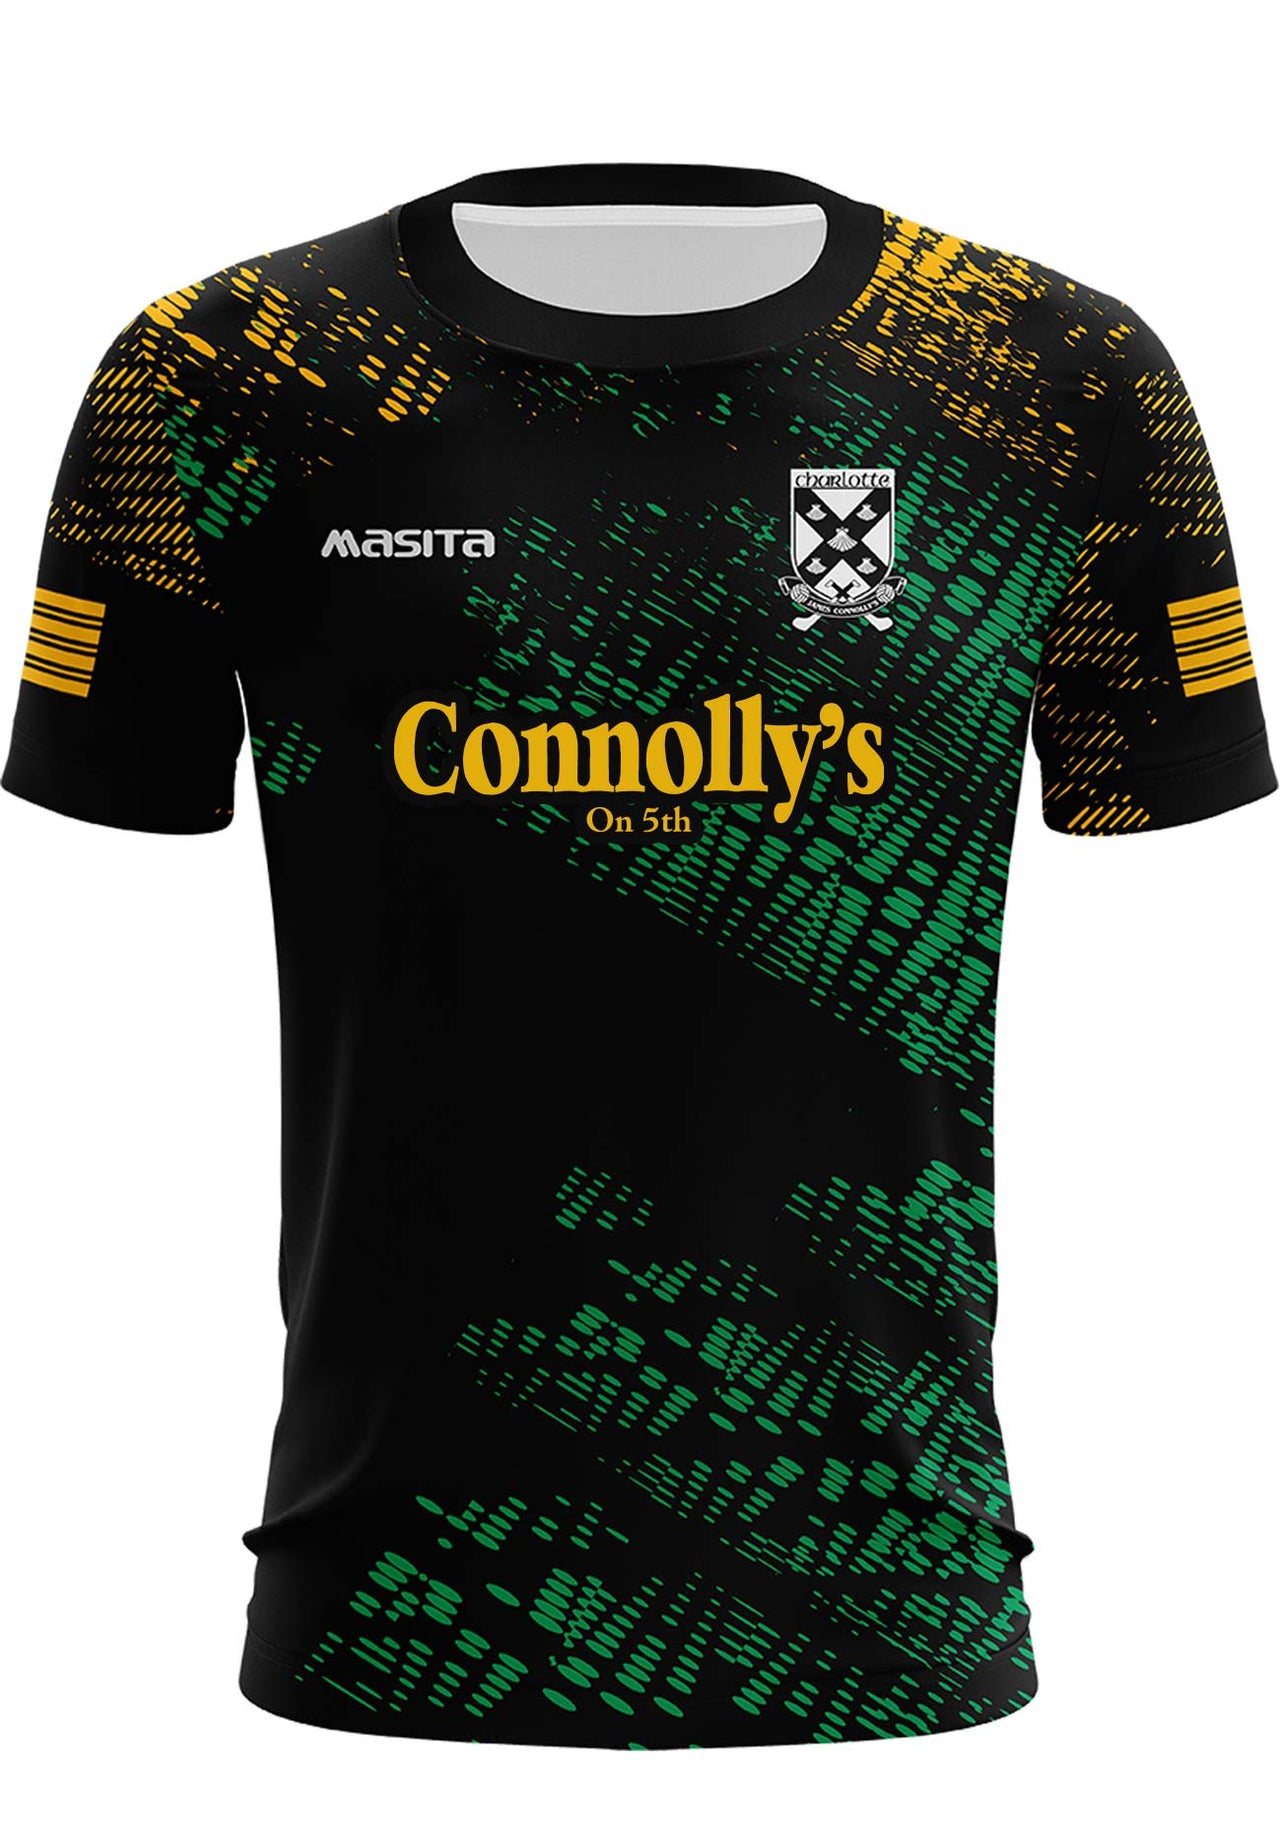 Charlotte James Connolly's Training Jersey Regular Fit Adult